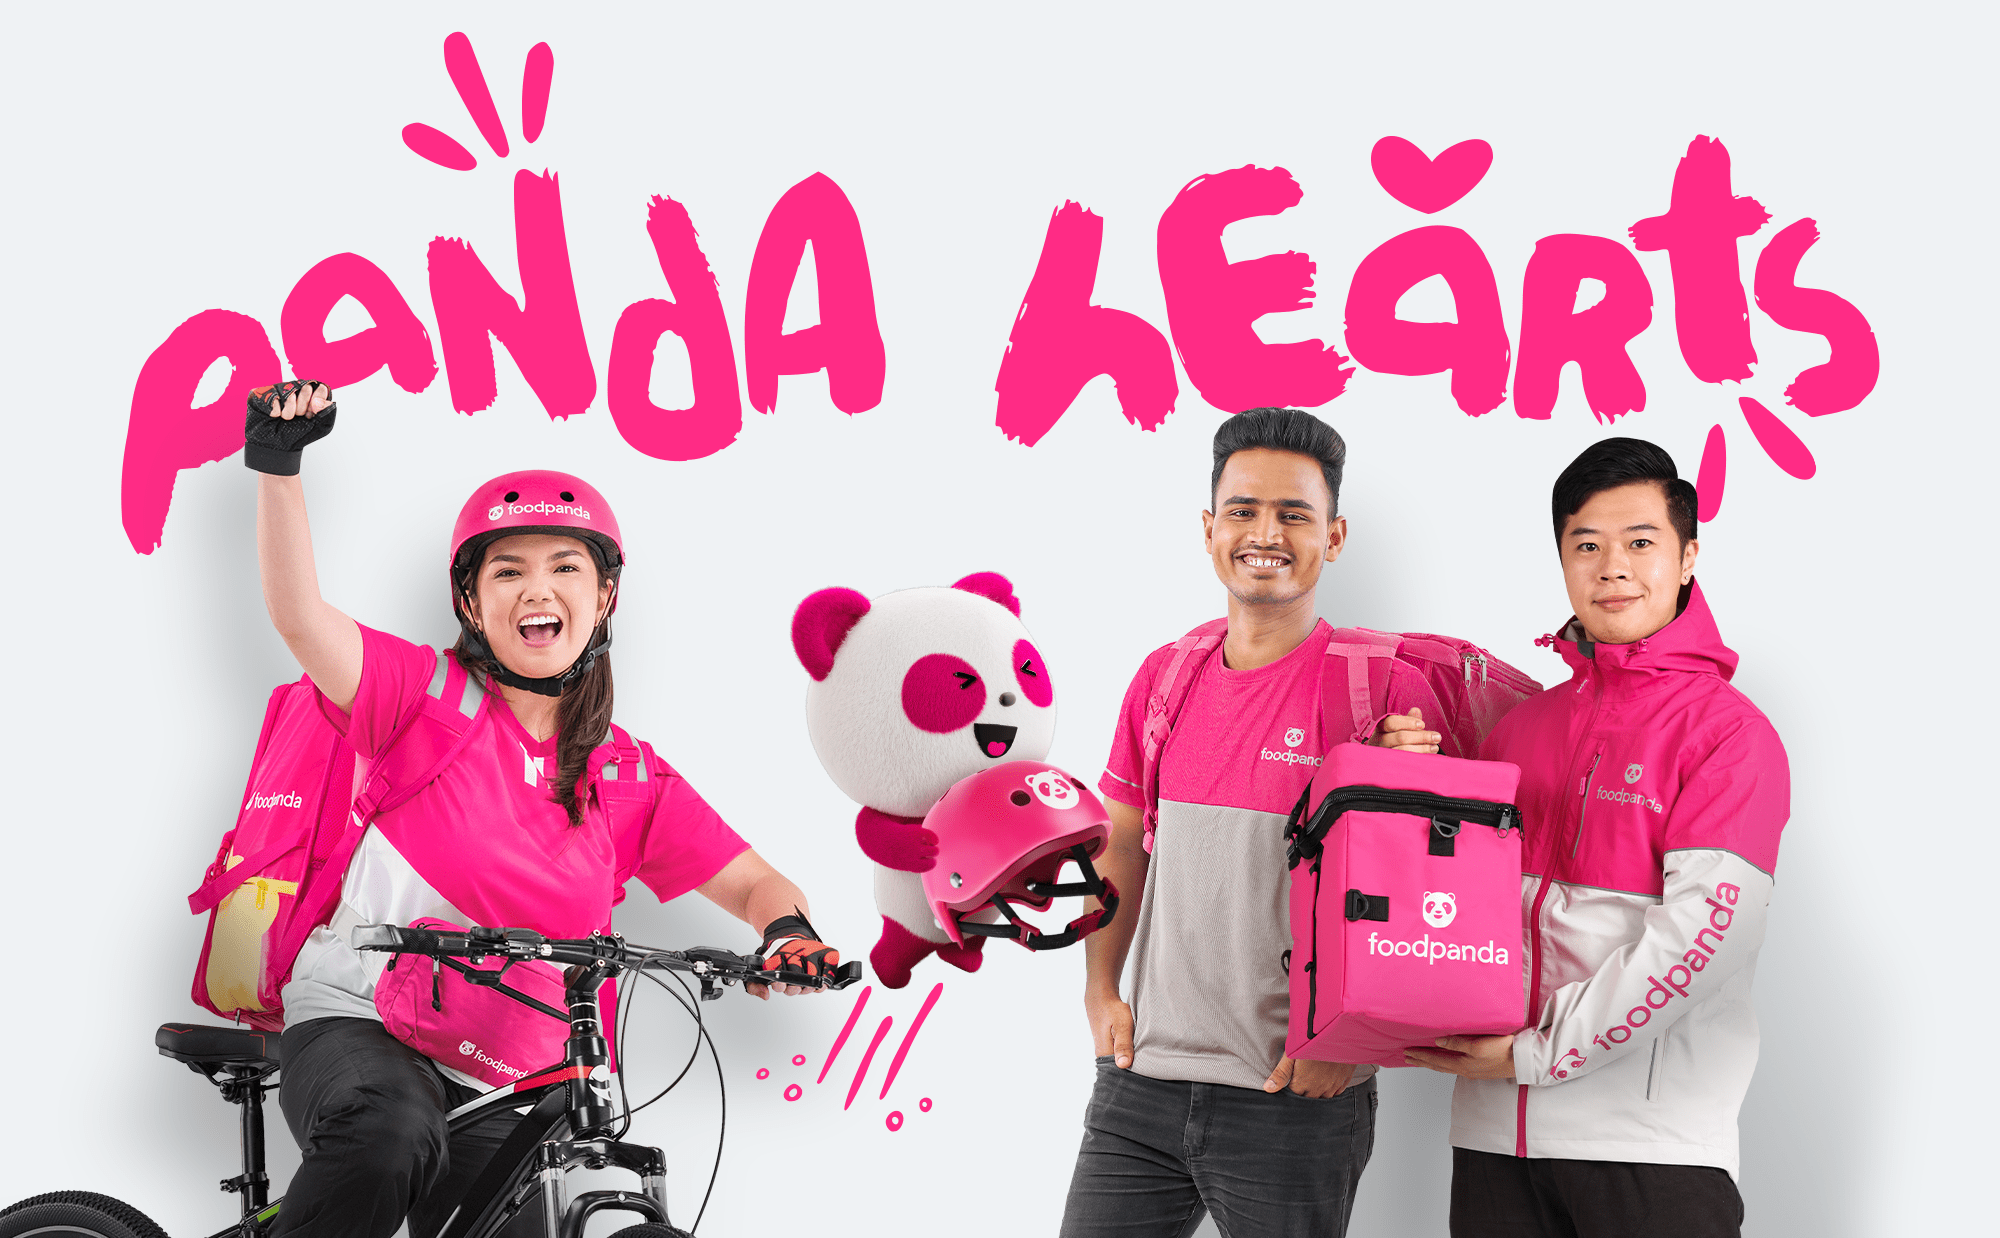 foodpanda reaffirms commitment to enhance delivery partners’ work experience with ‘panda hearts’ 